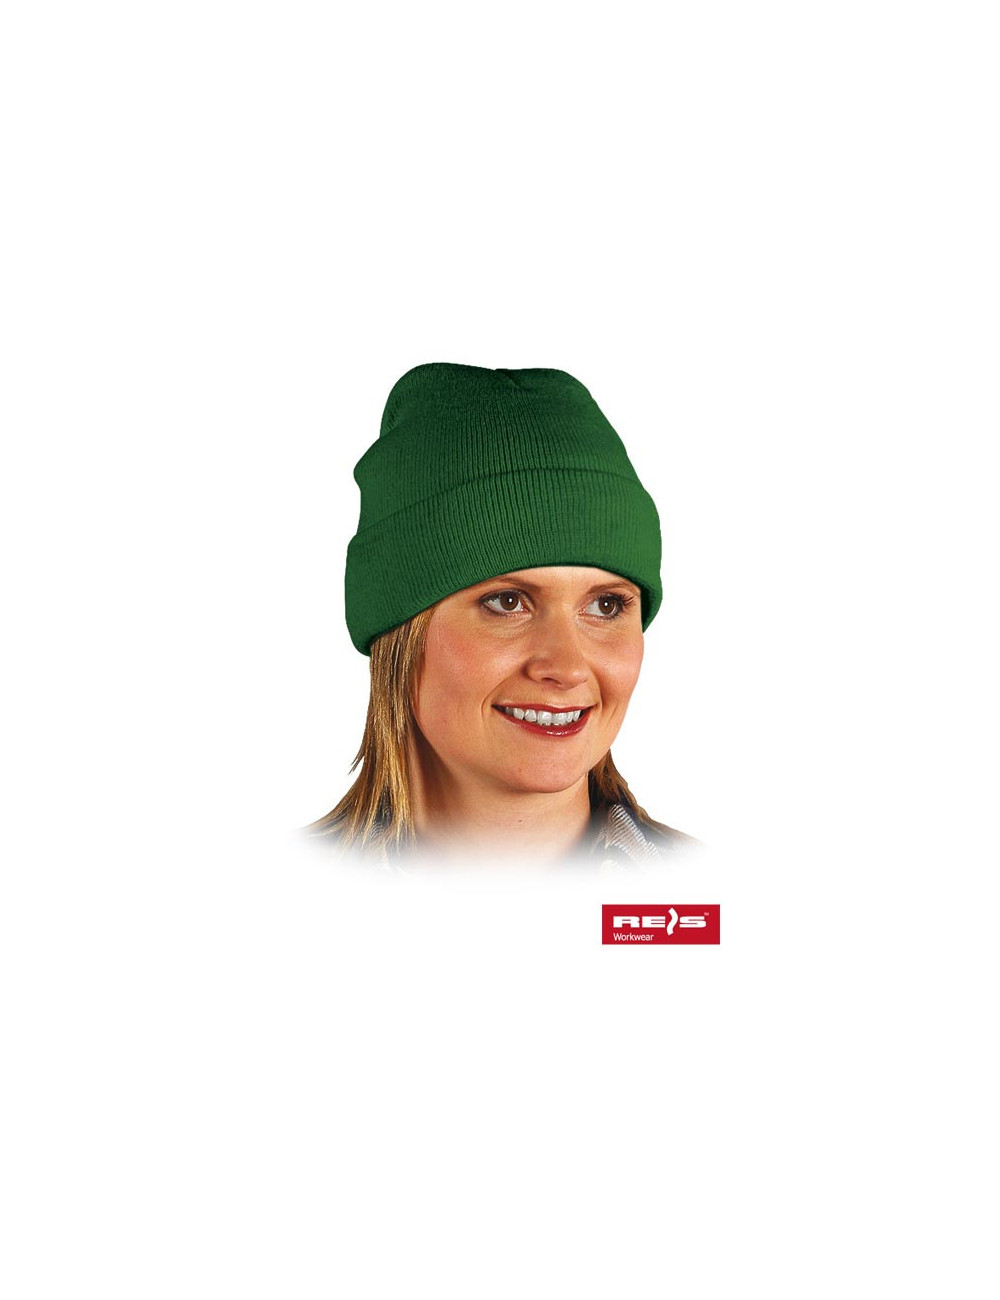 Protective black hat with green Reis